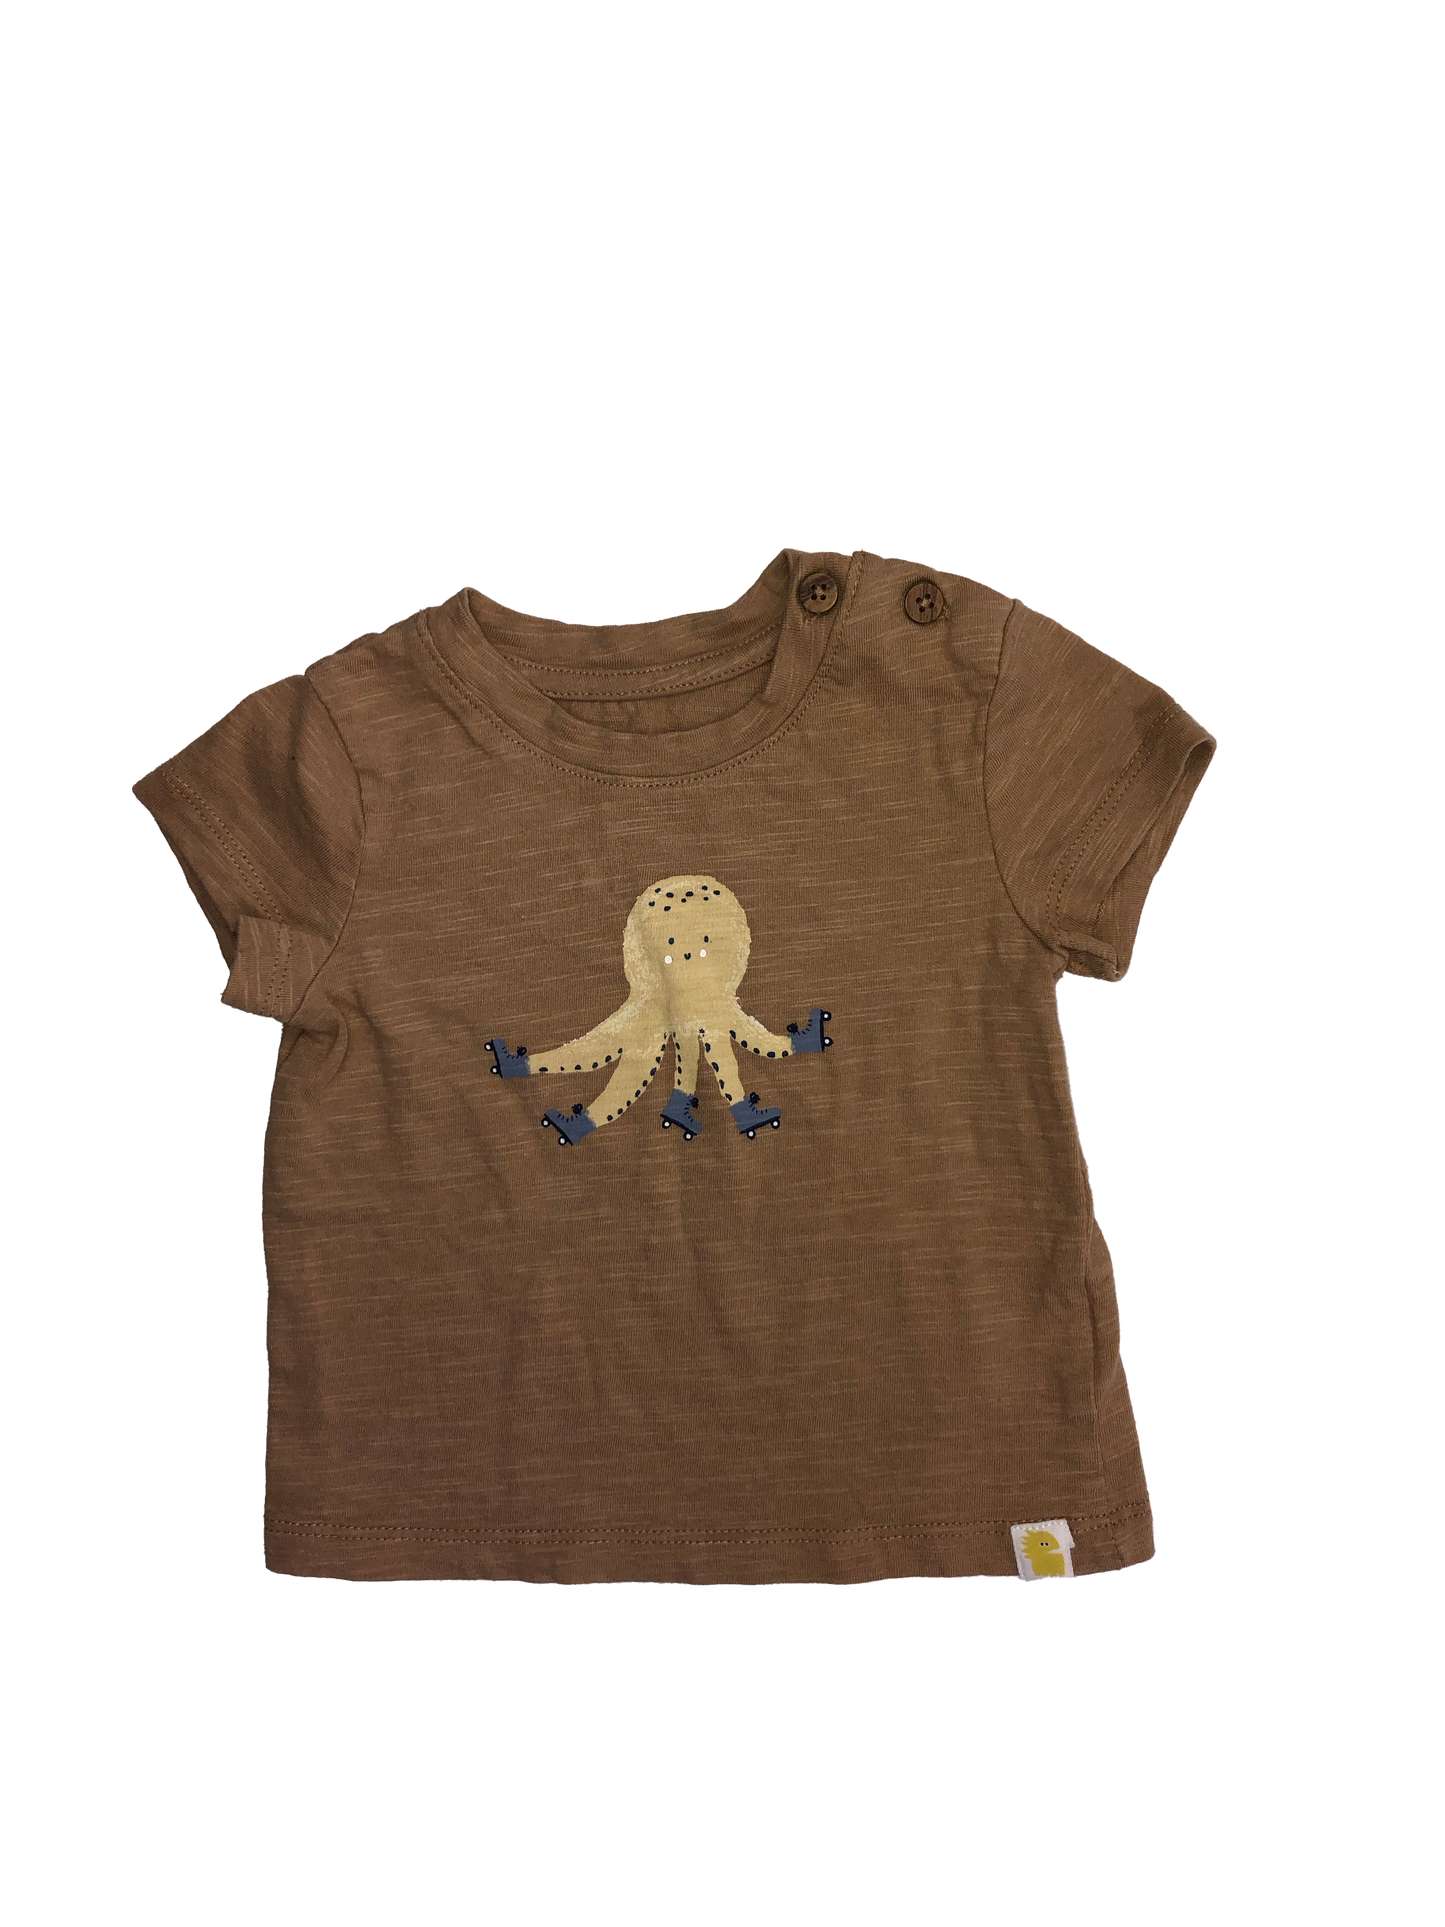 Rise Little Earthling Tan T-Shirt with Octopus 6-9M